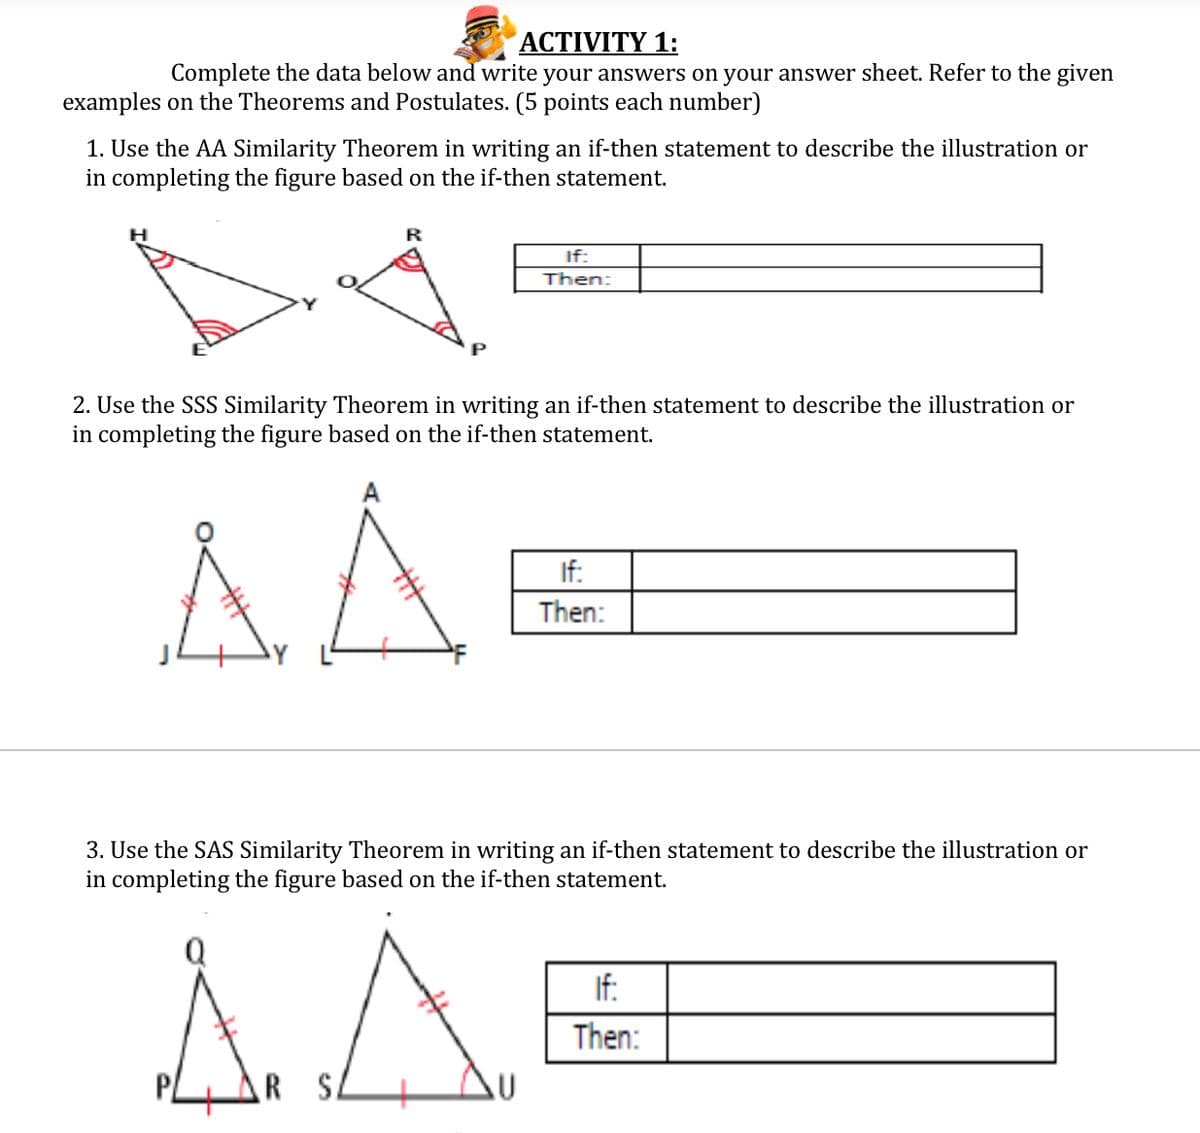 ACTIVITY 1:
Complete the data below and write your answers on your answer sheet. Refer to the given
examples on the Theorems and Postulates. (5 points each number)
1. Use the AA Similarity Theorem in writing an if-then statement to describe the illustration or
in completing the figure based on the if-then statement.
If:
Then:
2. Use the SSS Similarity Theorem in writing an if-then statement to describe the illustration or
in completing the figure based on the if-then statement.
If:
Then:
3. Use the SAS Similarity Theore
in completing the figure based on the if-then statement.
writing an if-then statement to describe the illustration or
If:
Then:
